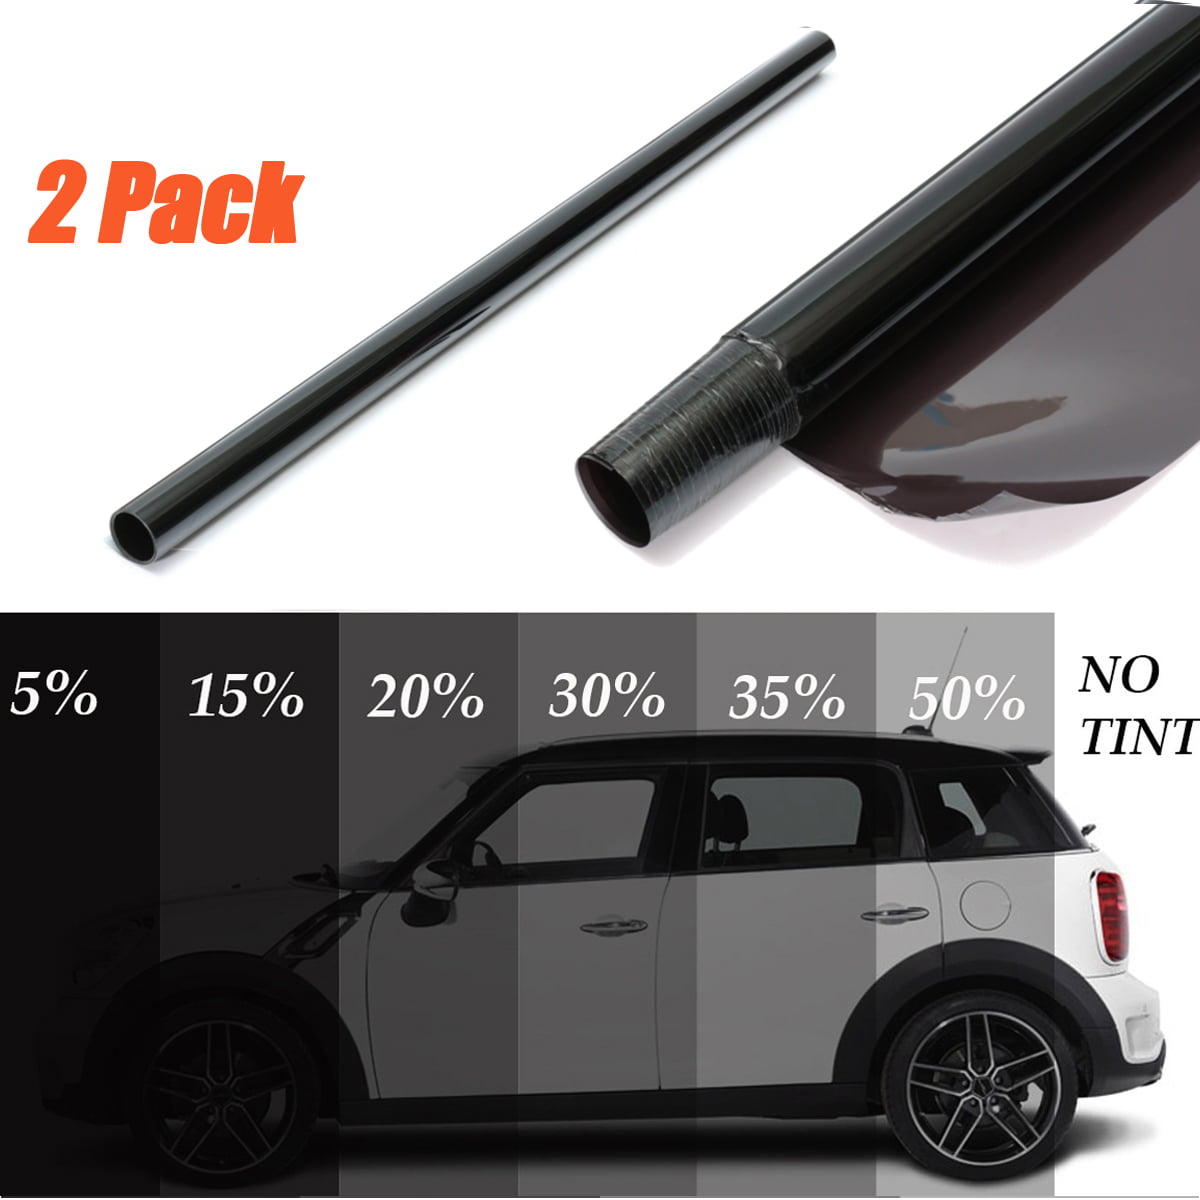 Mkbrother Uncut Roll Window Tint Film 20% VLT 36 in x 15 Ft Feet Car Home Office Glasss